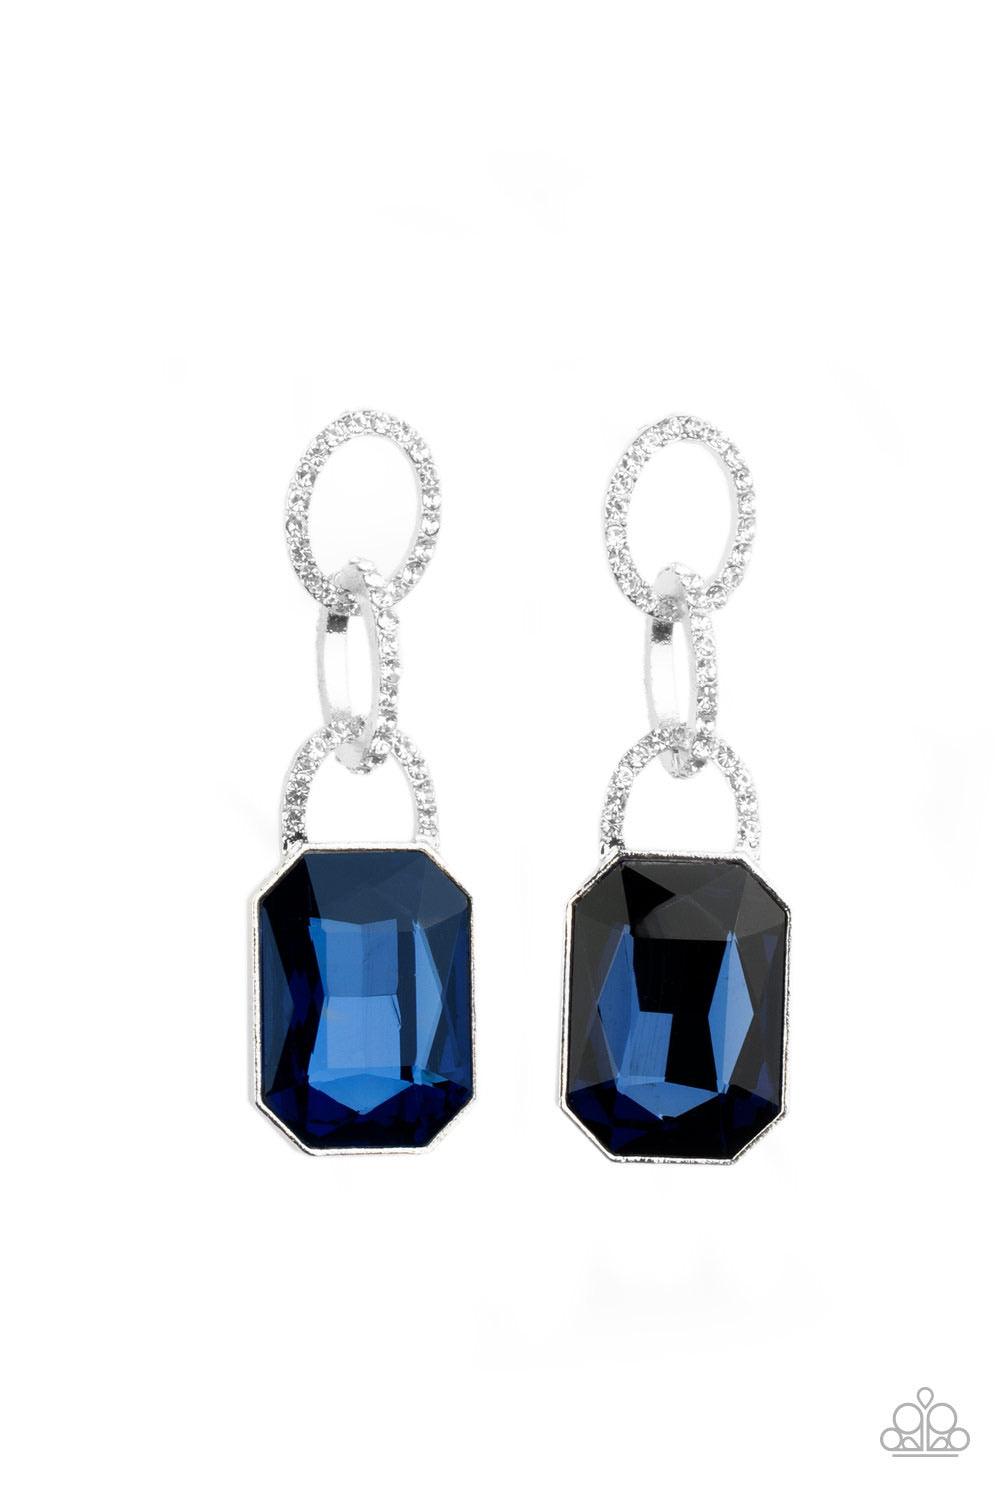 Paparazzi Accessories Superstar Status - Blue An oversized blue emerald-cut rhinestone swings from the bottom of white rhinestone encrusted links, creating a gorgeously dramatic lure. Earring attaches to a standard post fitting. Sold as one pair of post e